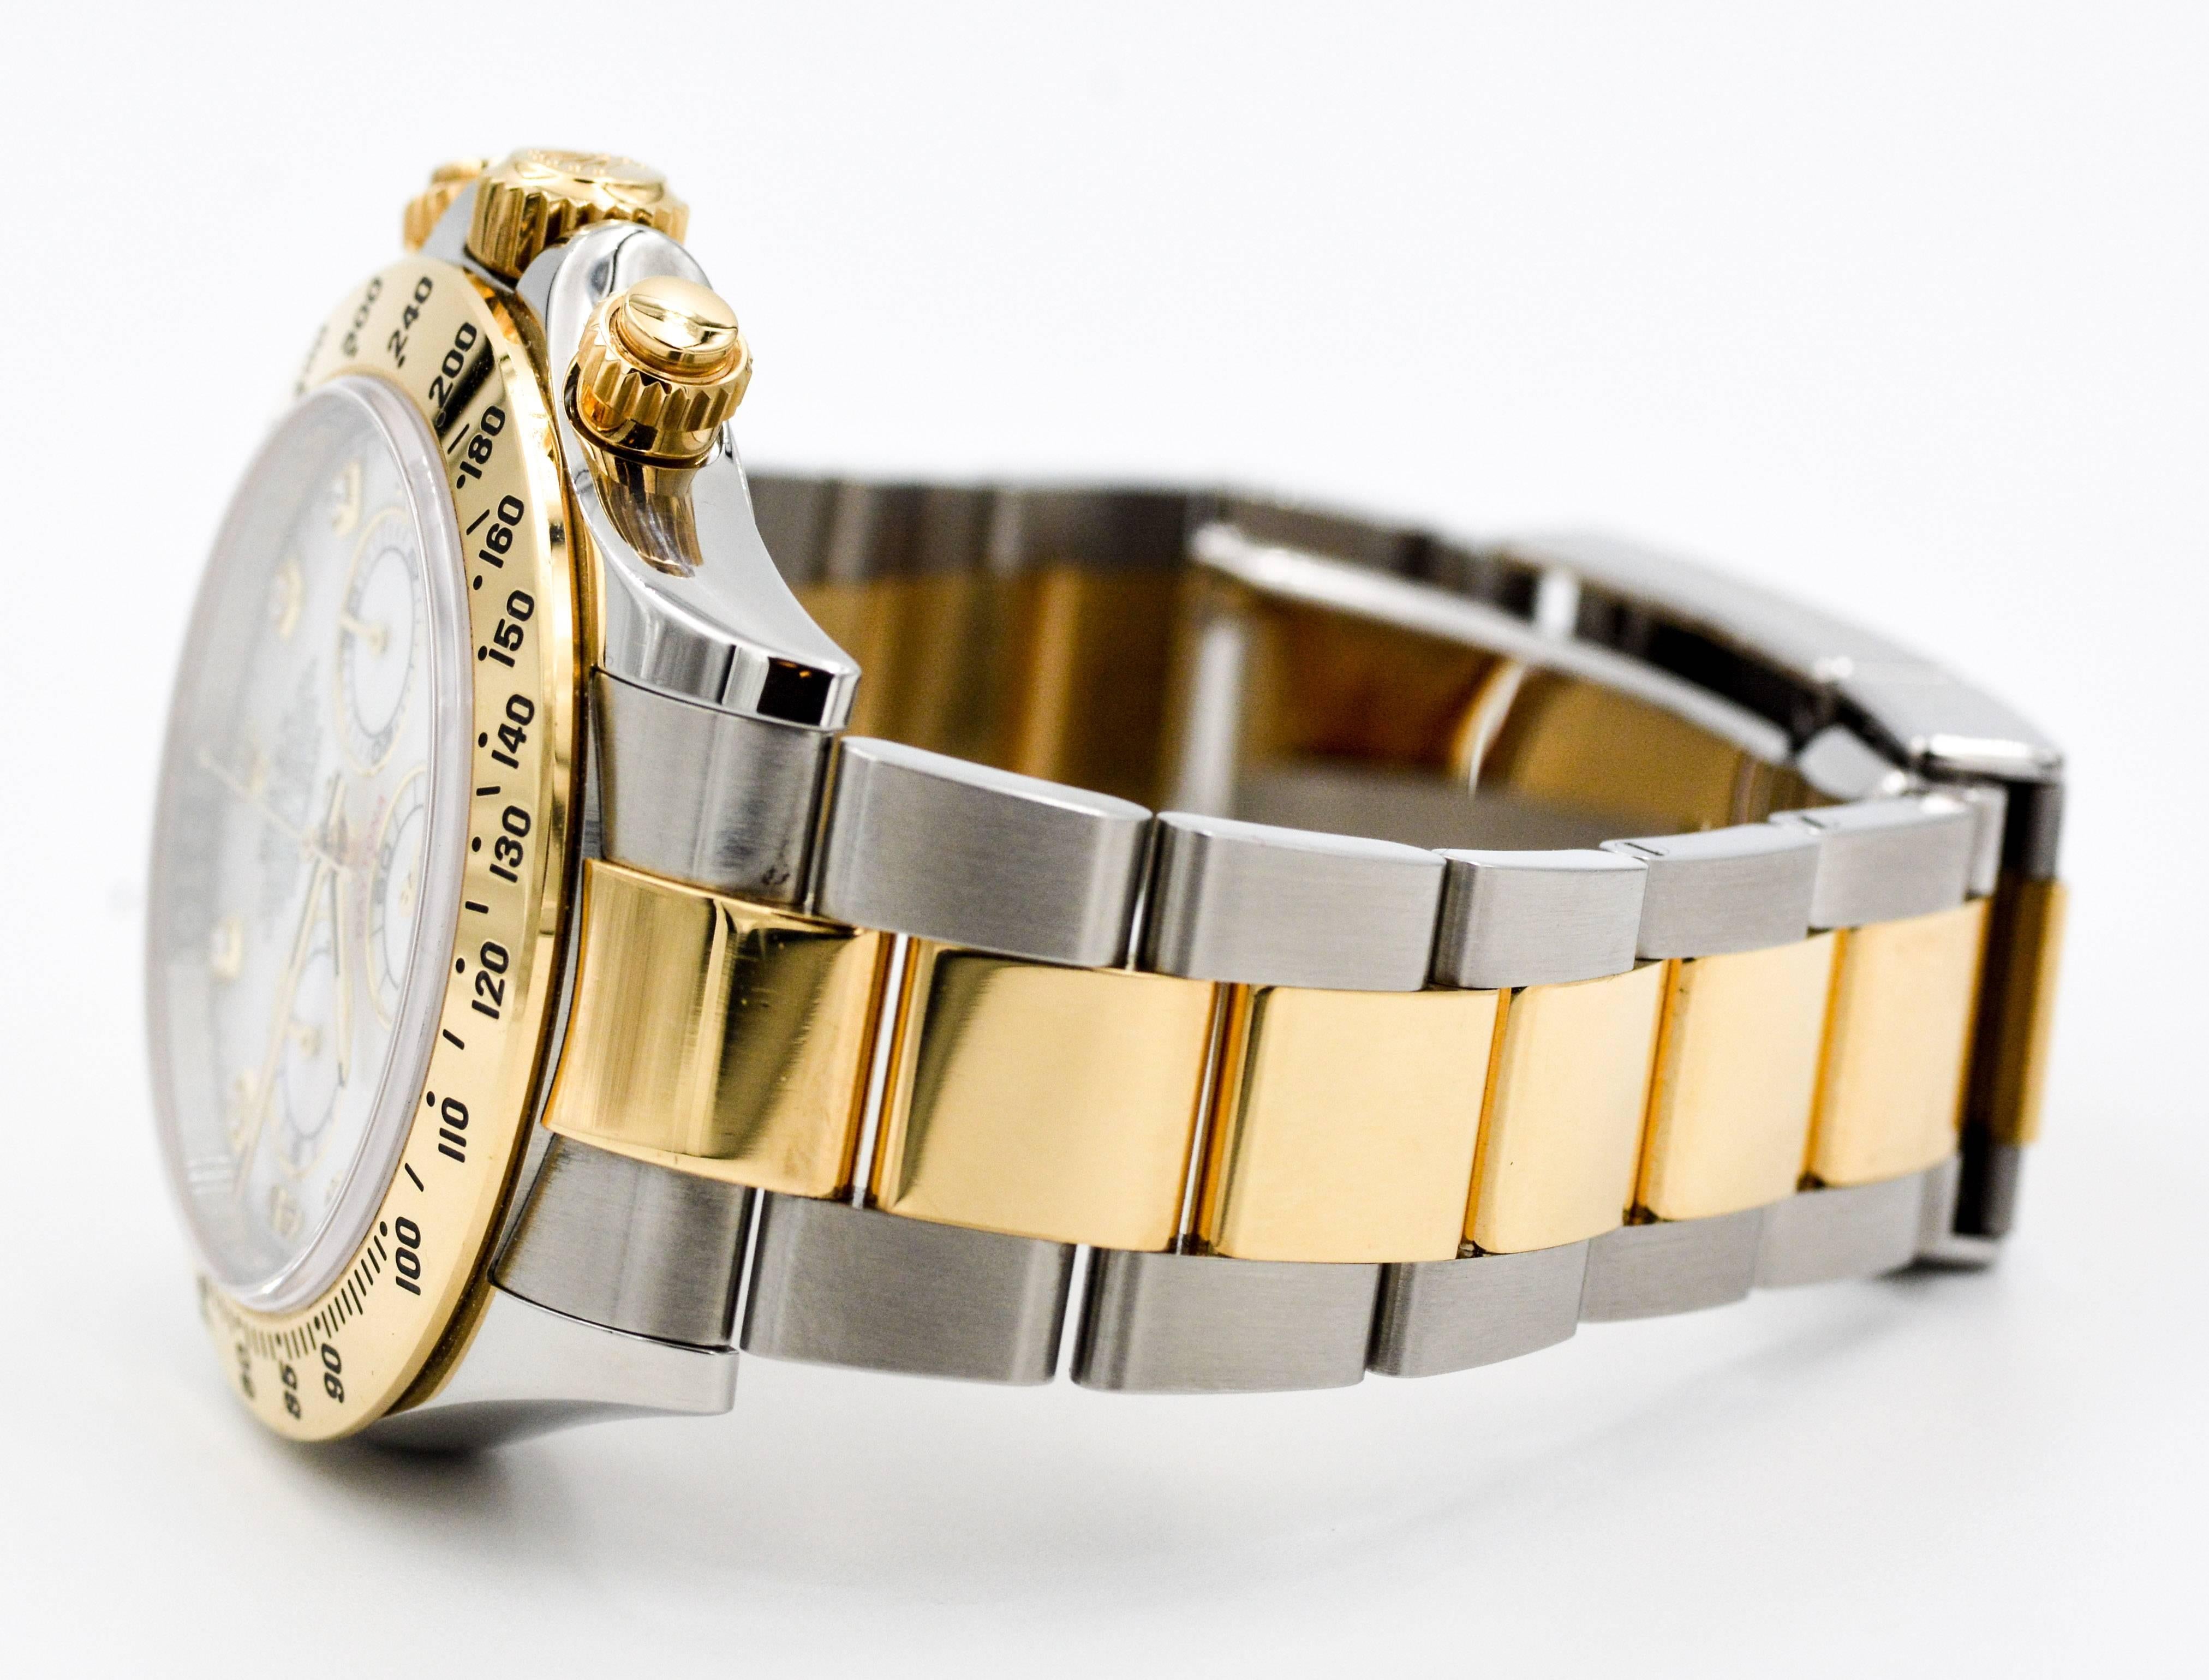 Classic Cosmograph Daytona in 904 L steel and 18kt yellow gold. Beautiful Mother of pearl diamond dial.   